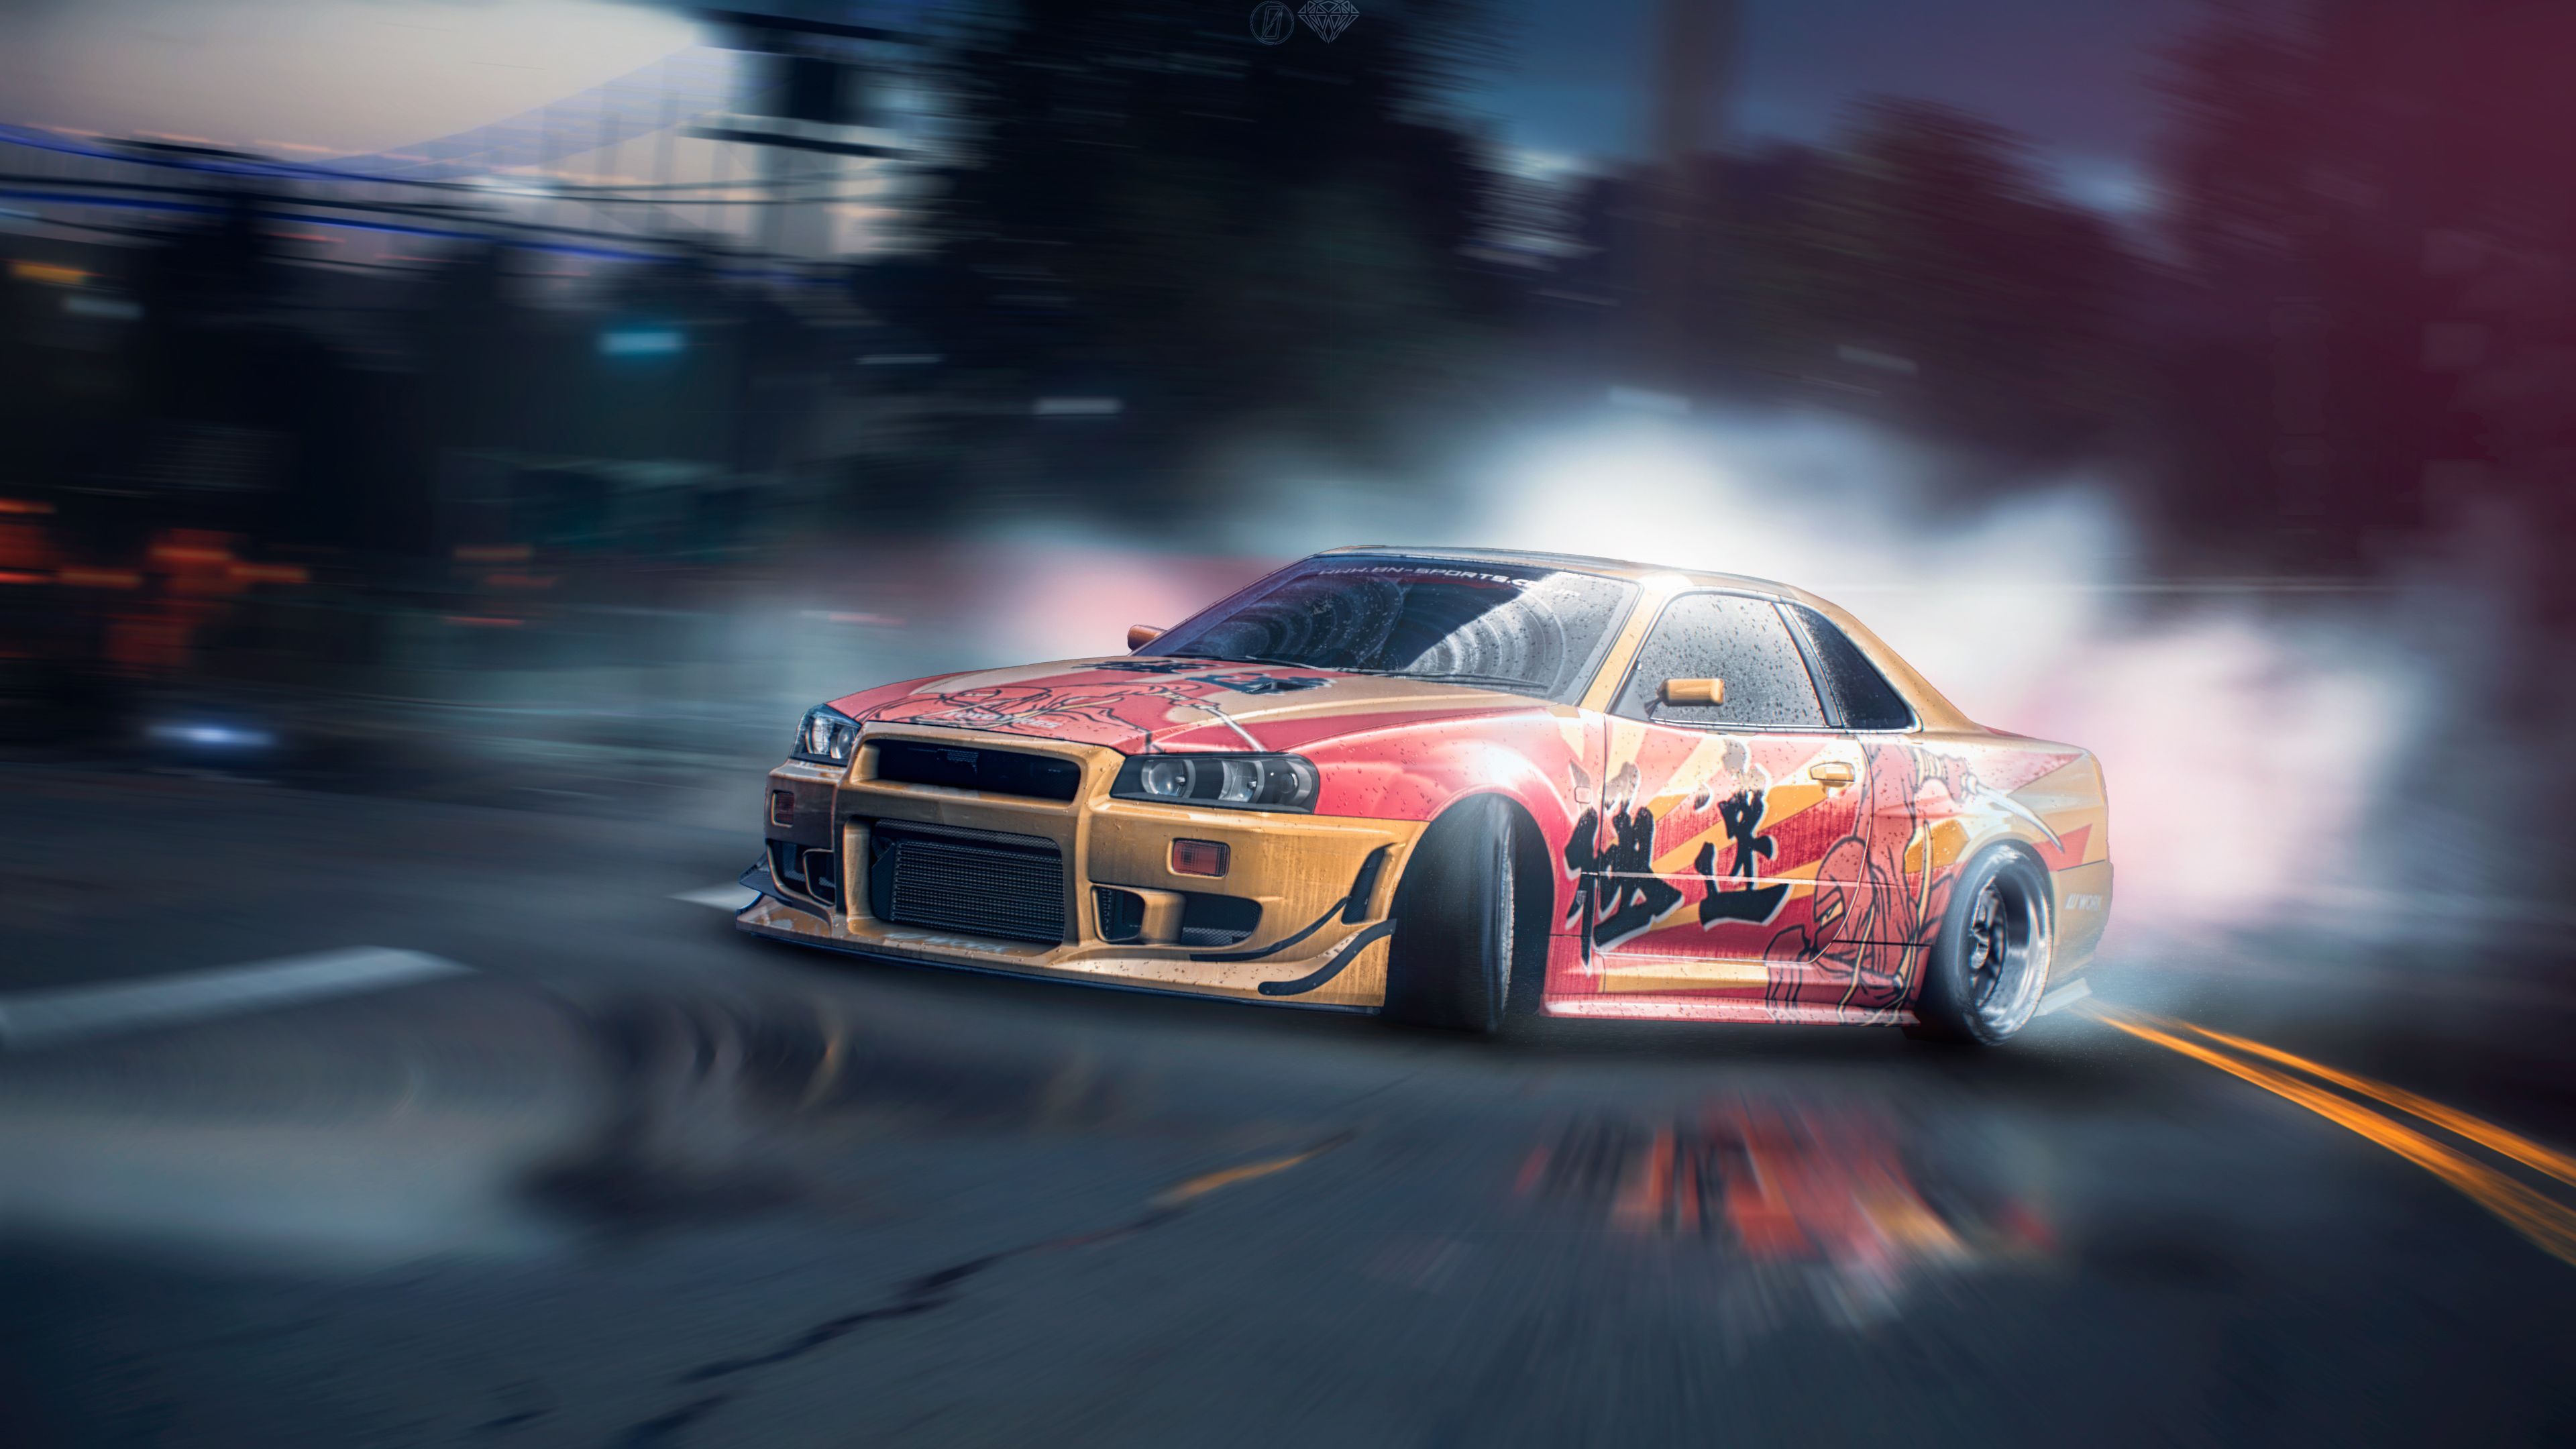 Nissan Skyline GT R Need For Speed X Street Racing Syndicate 4k, HD Games, 4k Wallpaper, Image, Background, Photo and Picture